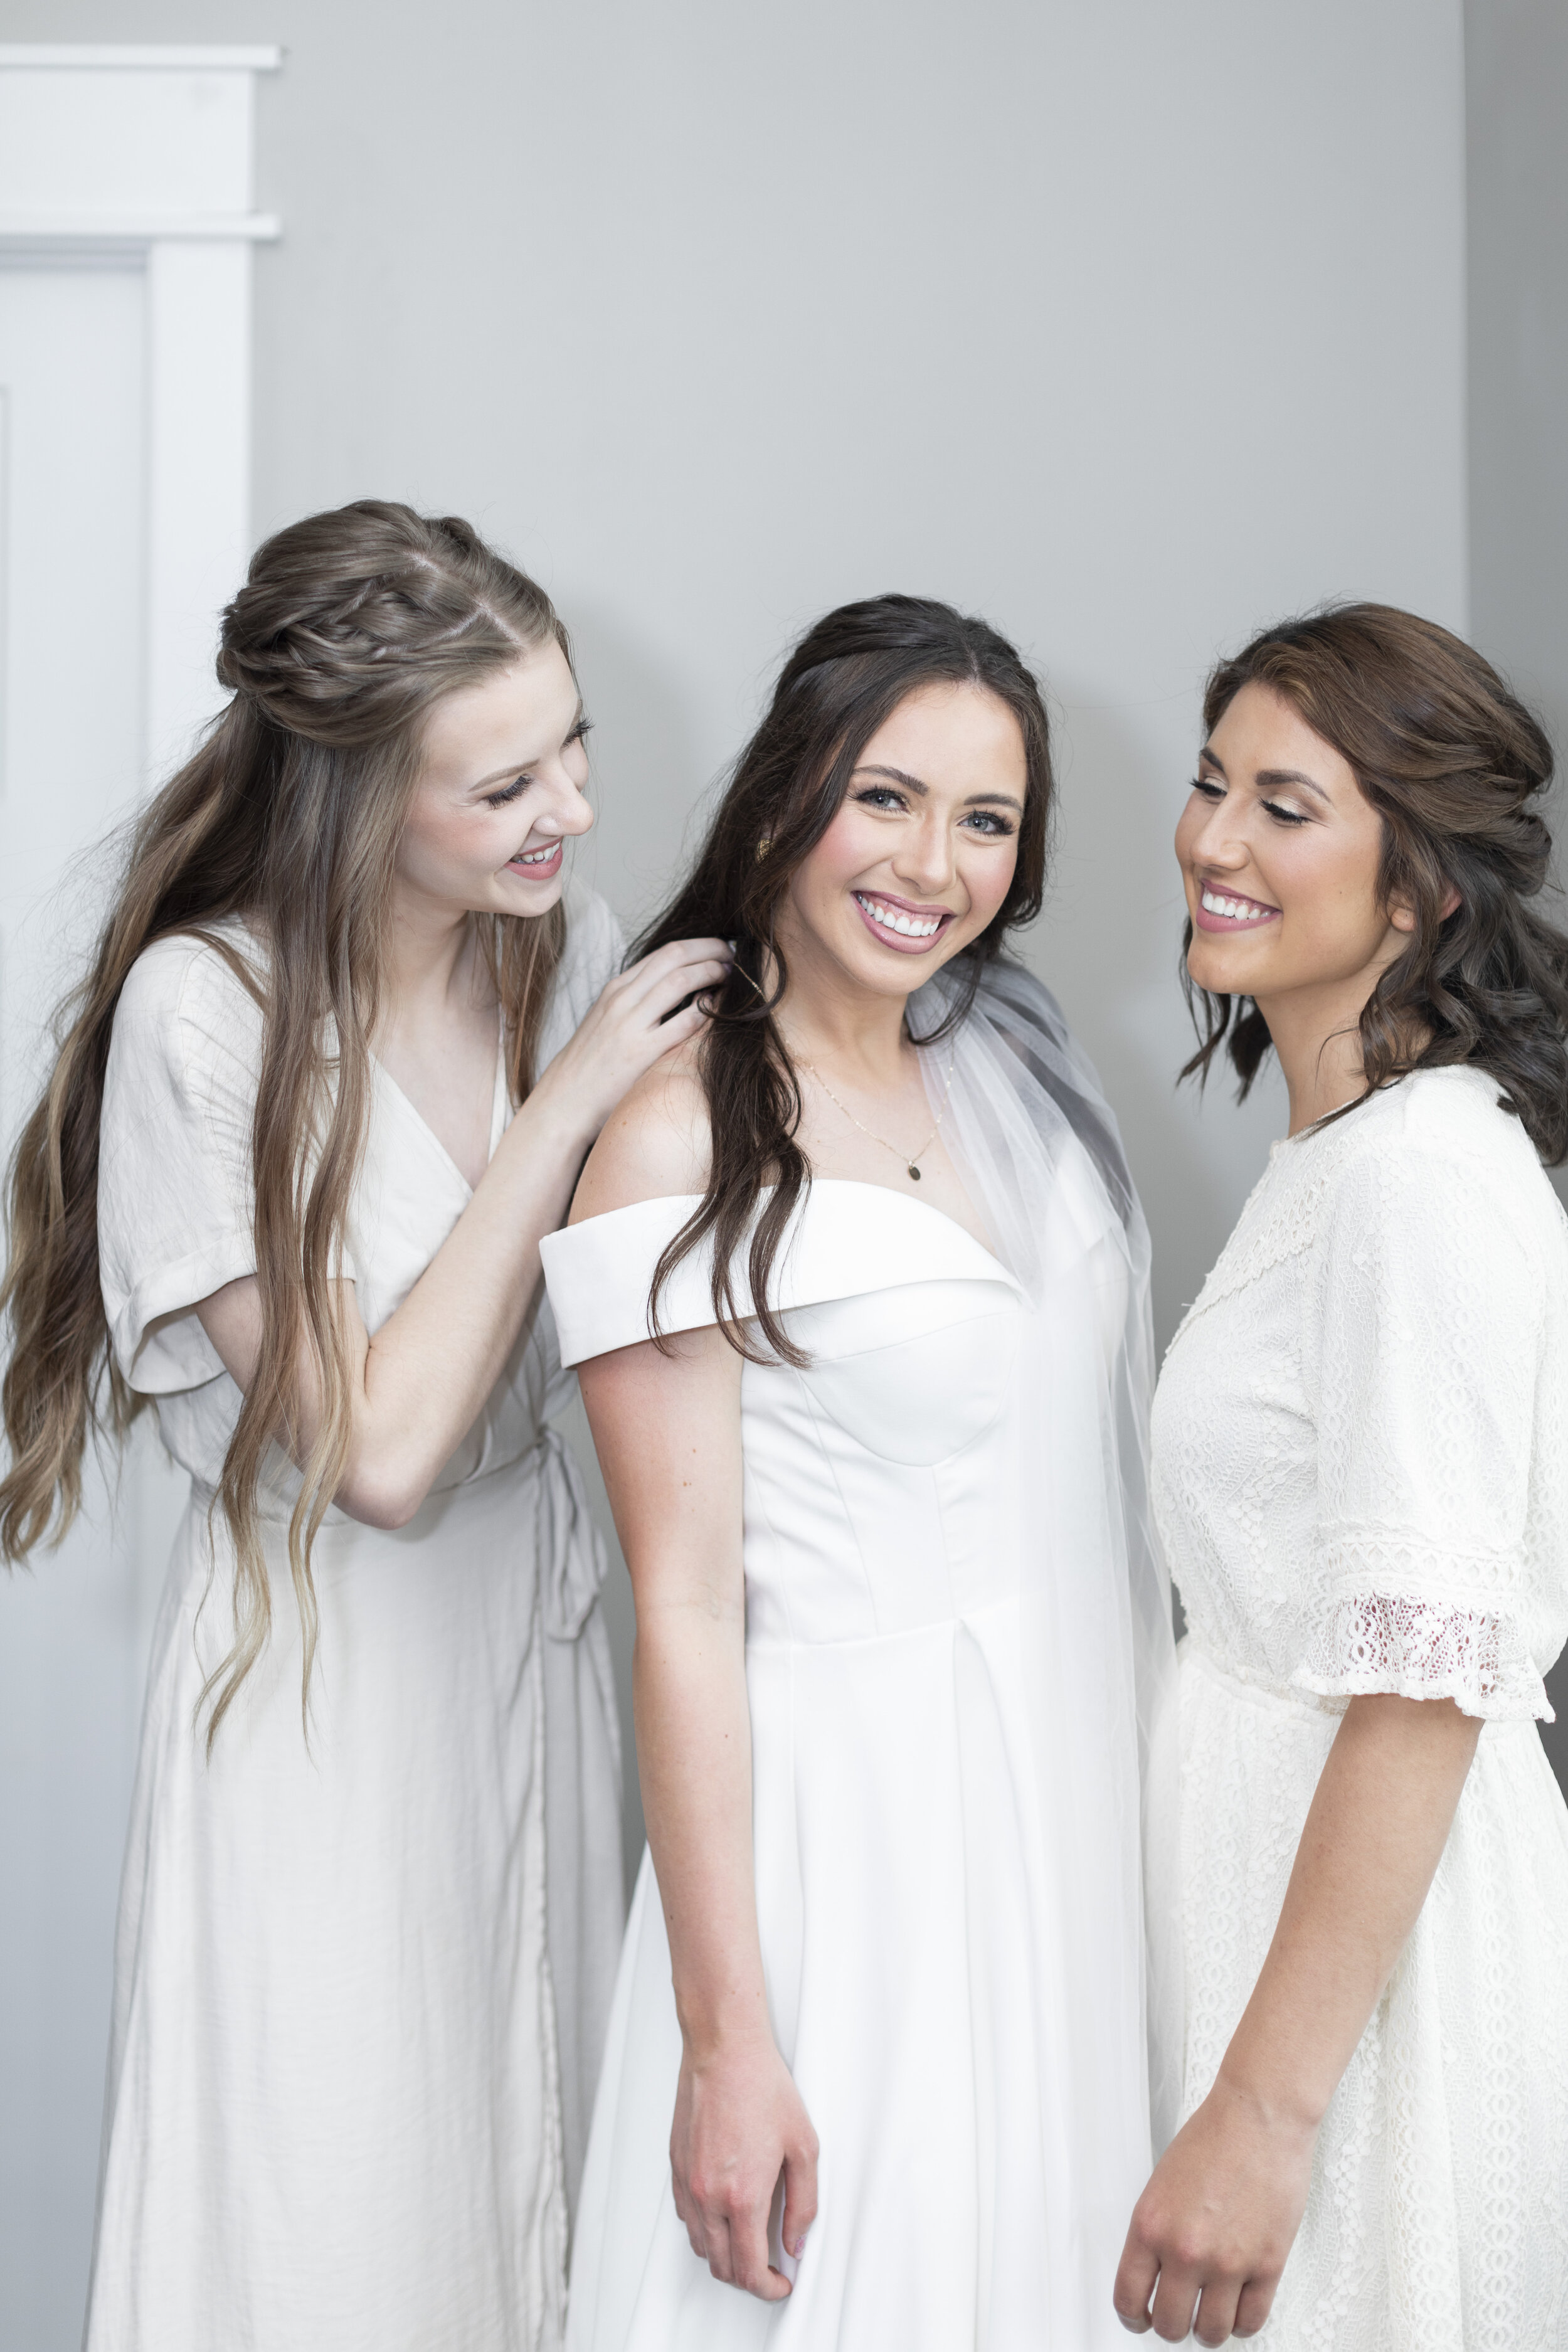  A bridesmaid and mother of the bride dotted on the bride during a wedding workshop in Logan, Utah with Clarity Lane Photography. indoor wedding portrait all skin tone photograpy tricks #claritylanephotography #claritylaneweddings #claritylaneworksho